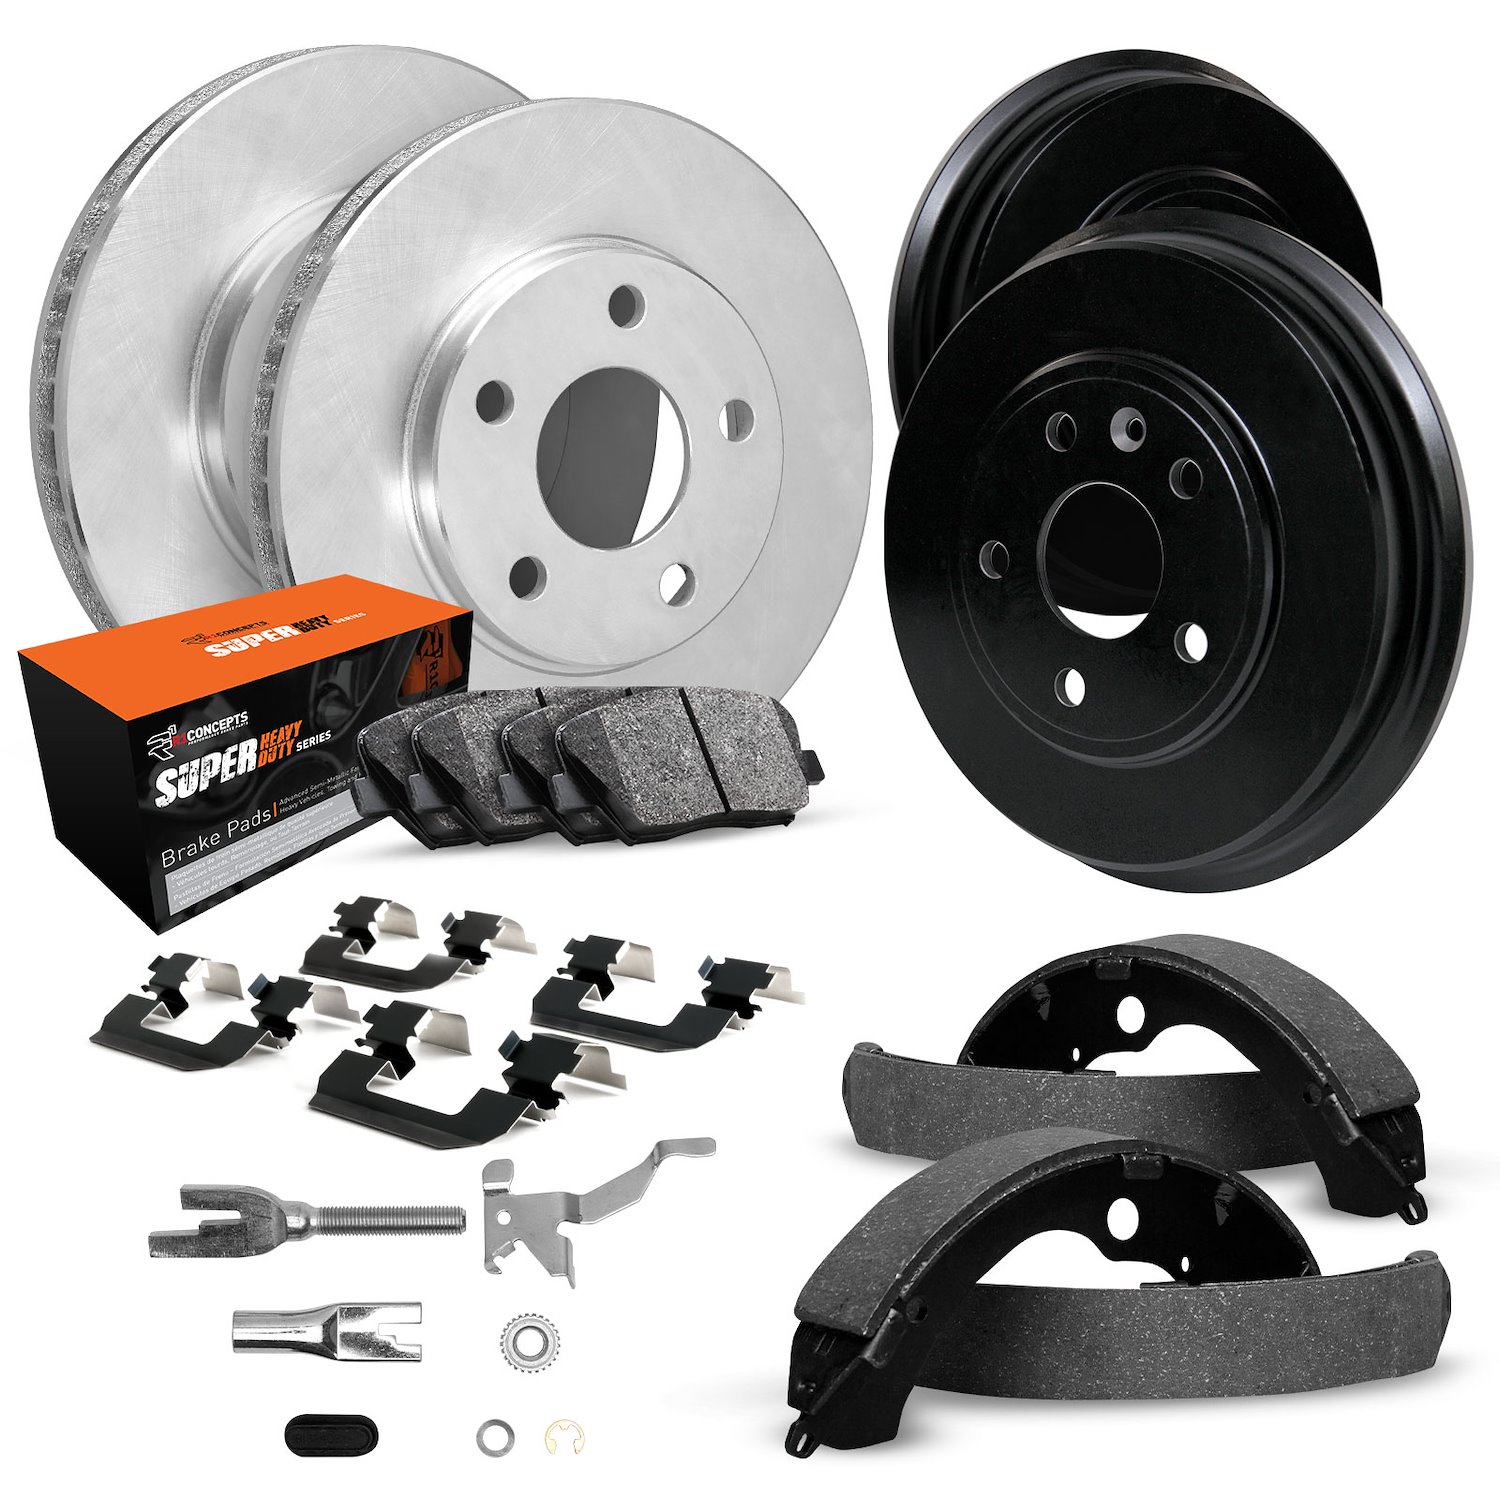 E-Line Blank Brake Rotor & Drum Set w/Super-Duty Pads, Shoes, Hardware, & Adjusters, 1985-1999 GM, Position: Front & Rear